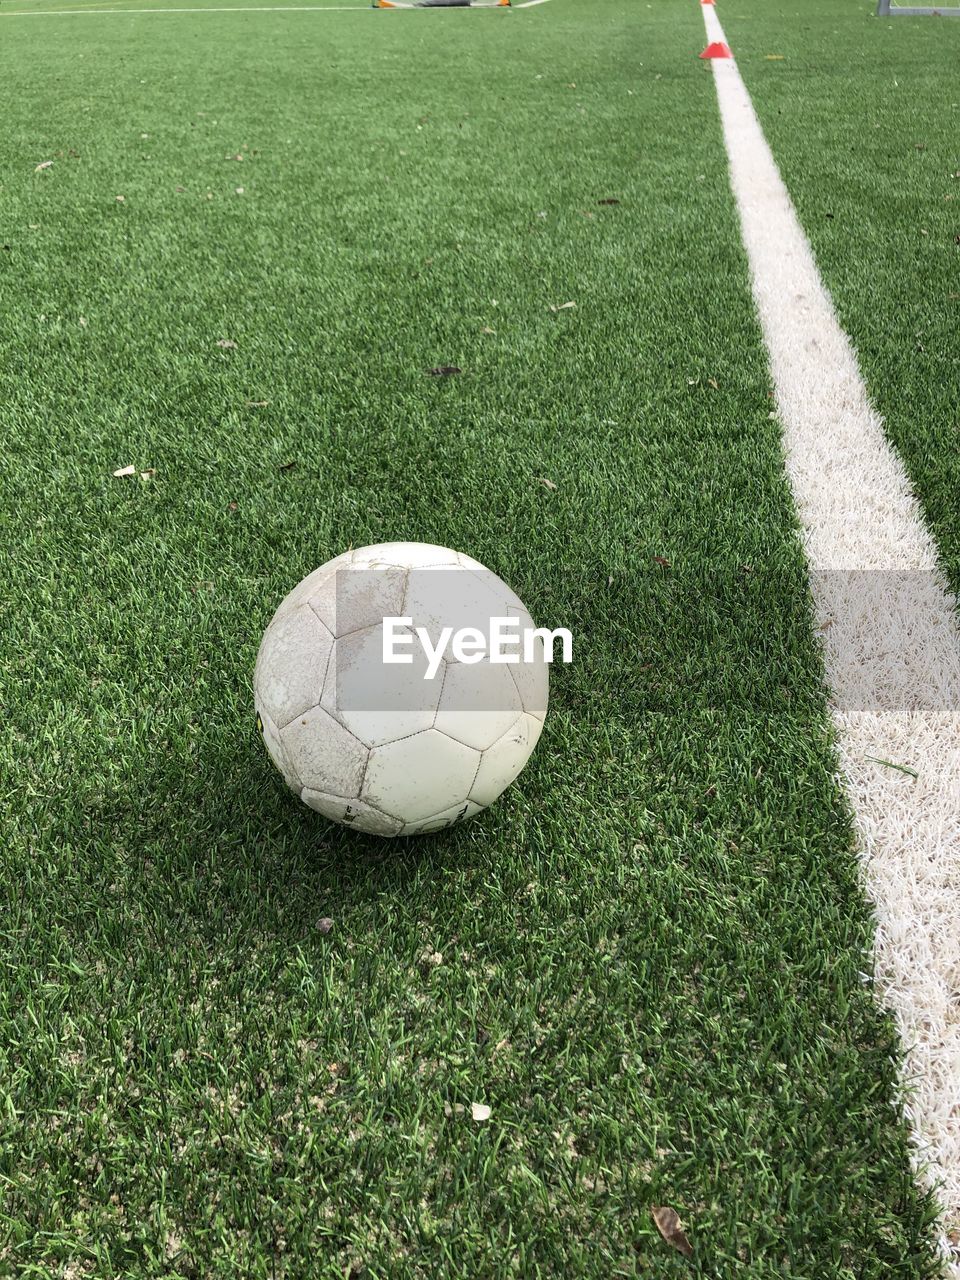 HIGH ANGLE VIEW OF SOCCER BALL ON GRASS